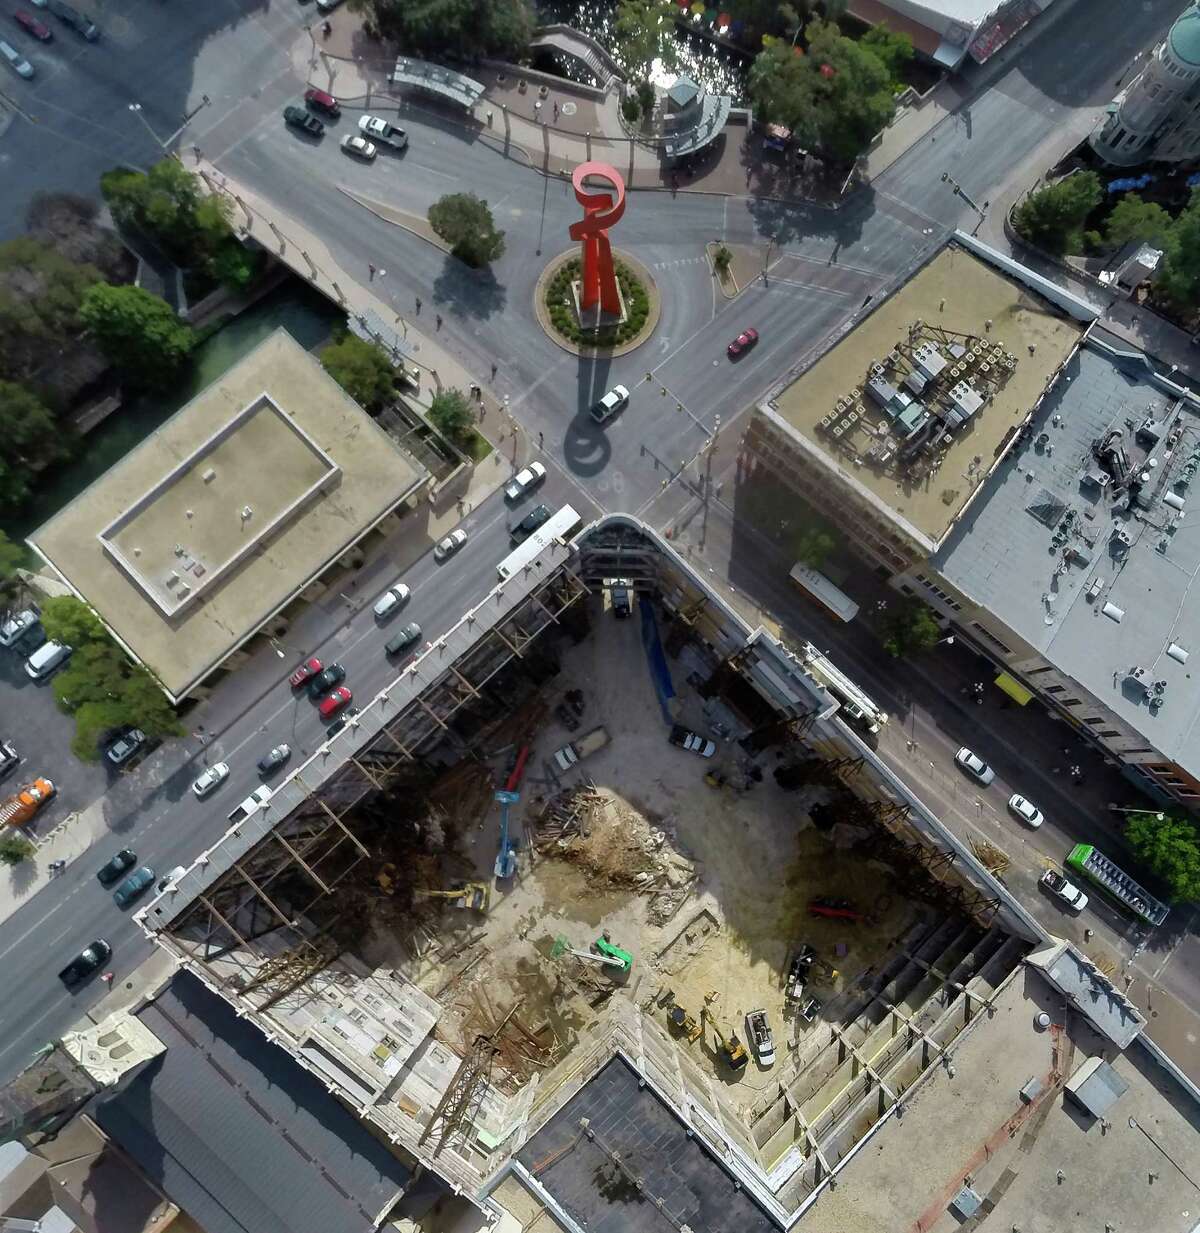 The former Joske's building at the corner of Alamo and Commerce is seen Monday Sept. 15, 2014 in an aerial image taken with a quadcopter. Construction crews on Monday completed demolishing the old, timber-frame structure of the historic Joske?•s building as part of the renovation of Rivercenter mall. Part of the demolition included removing the roof of the former department store, at the corner of Alamo and Commerce streets, so crews can begin building 75-foot concrete piers to support the new structure, which soon will house a multi-level H&M store among other tenants.